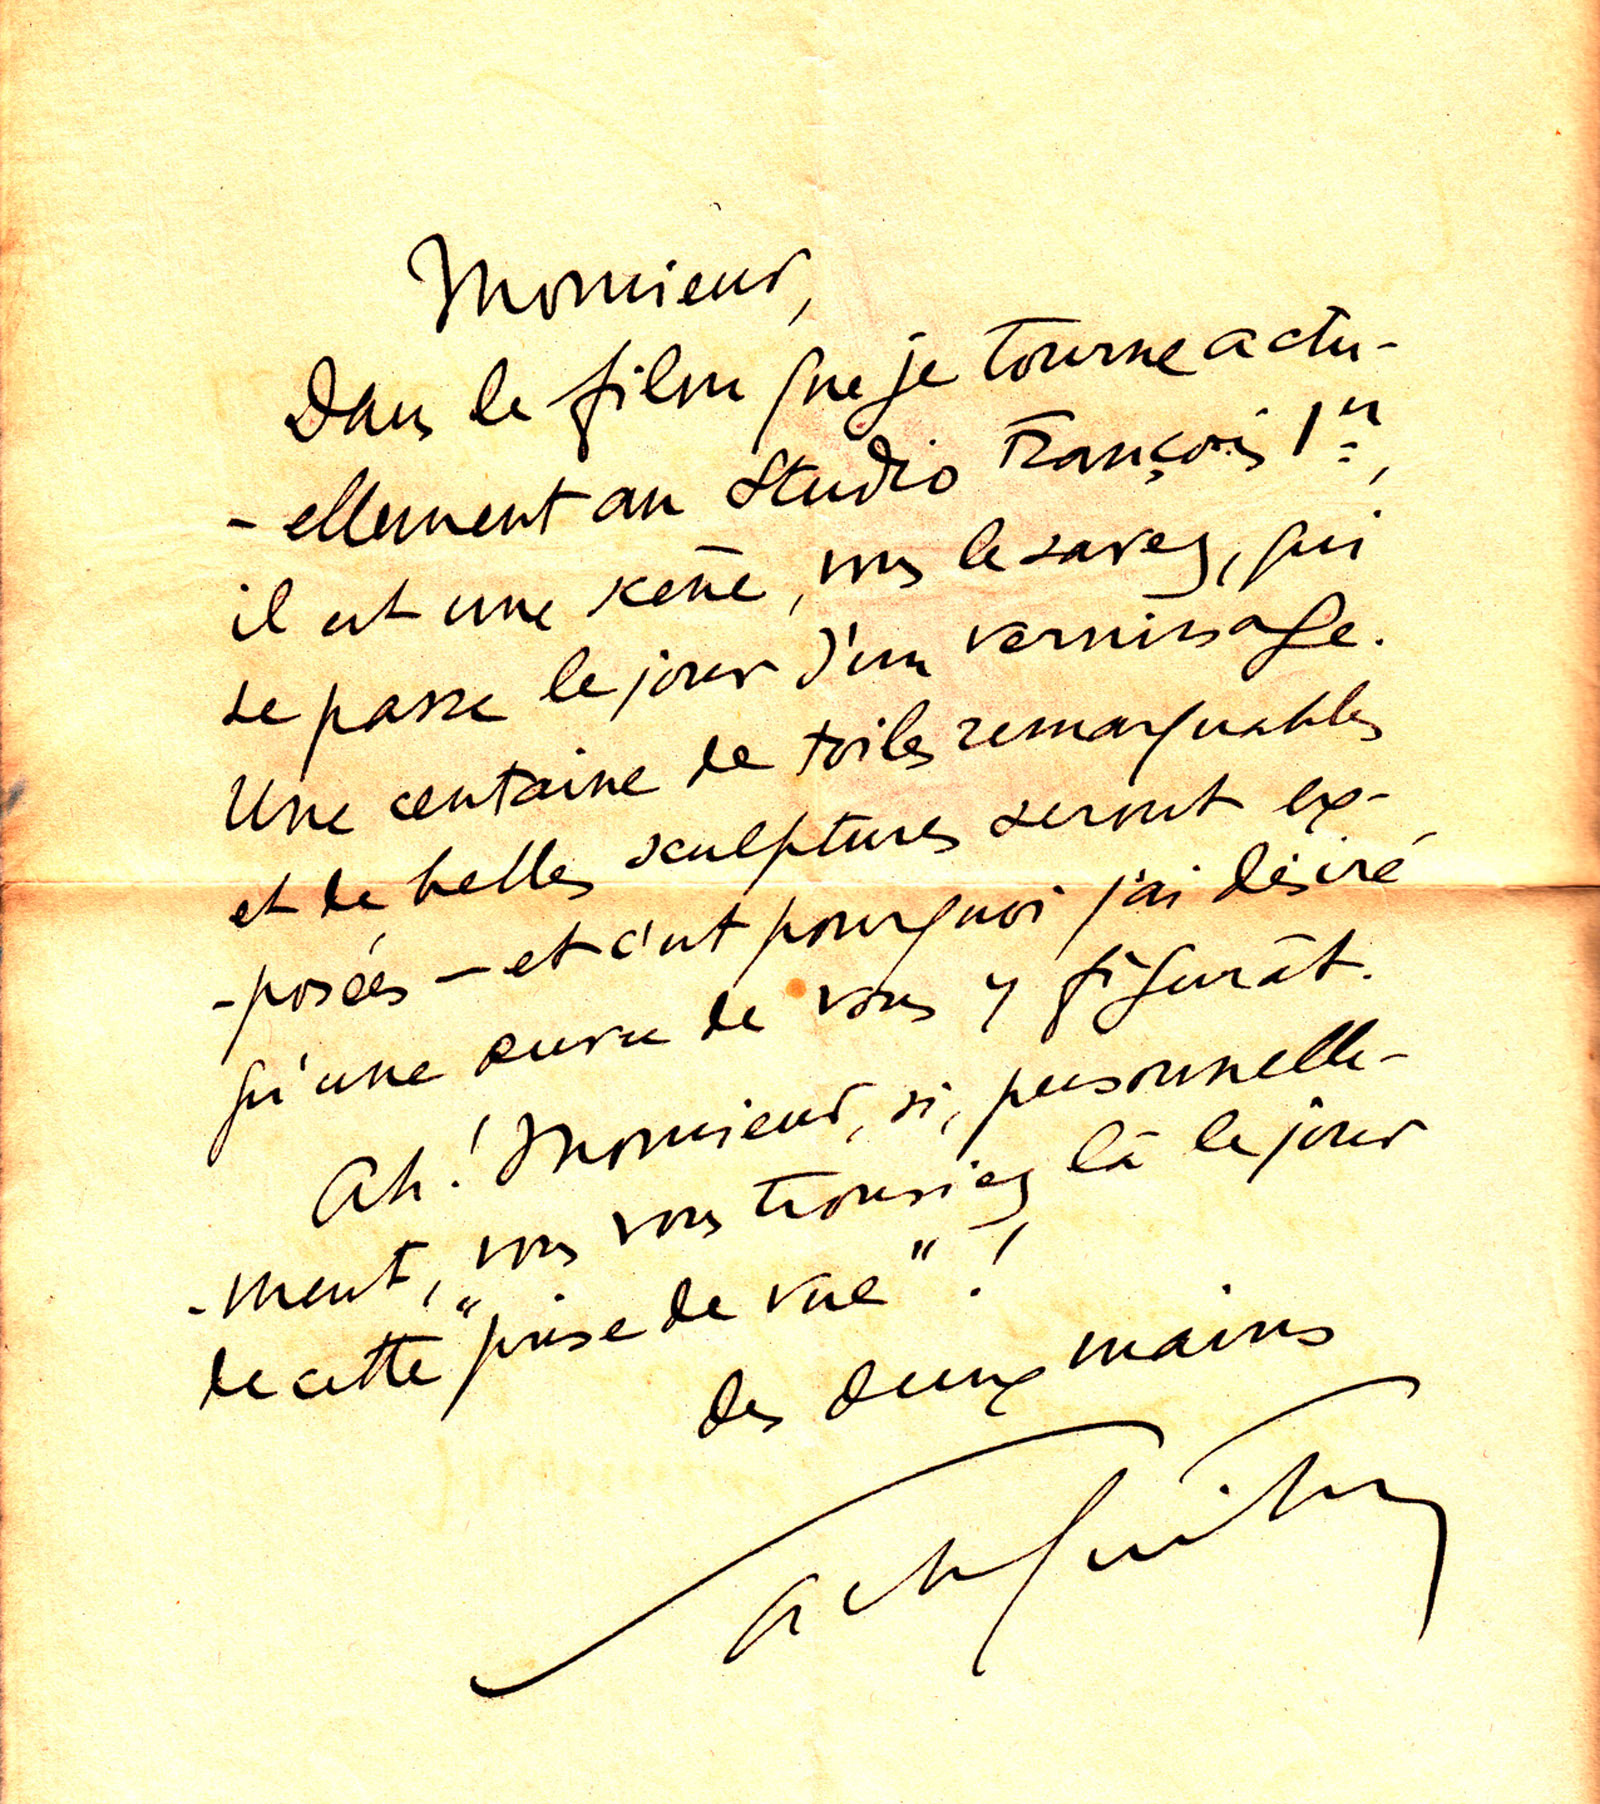 A letter from an enthusiastic Sacha Guitry